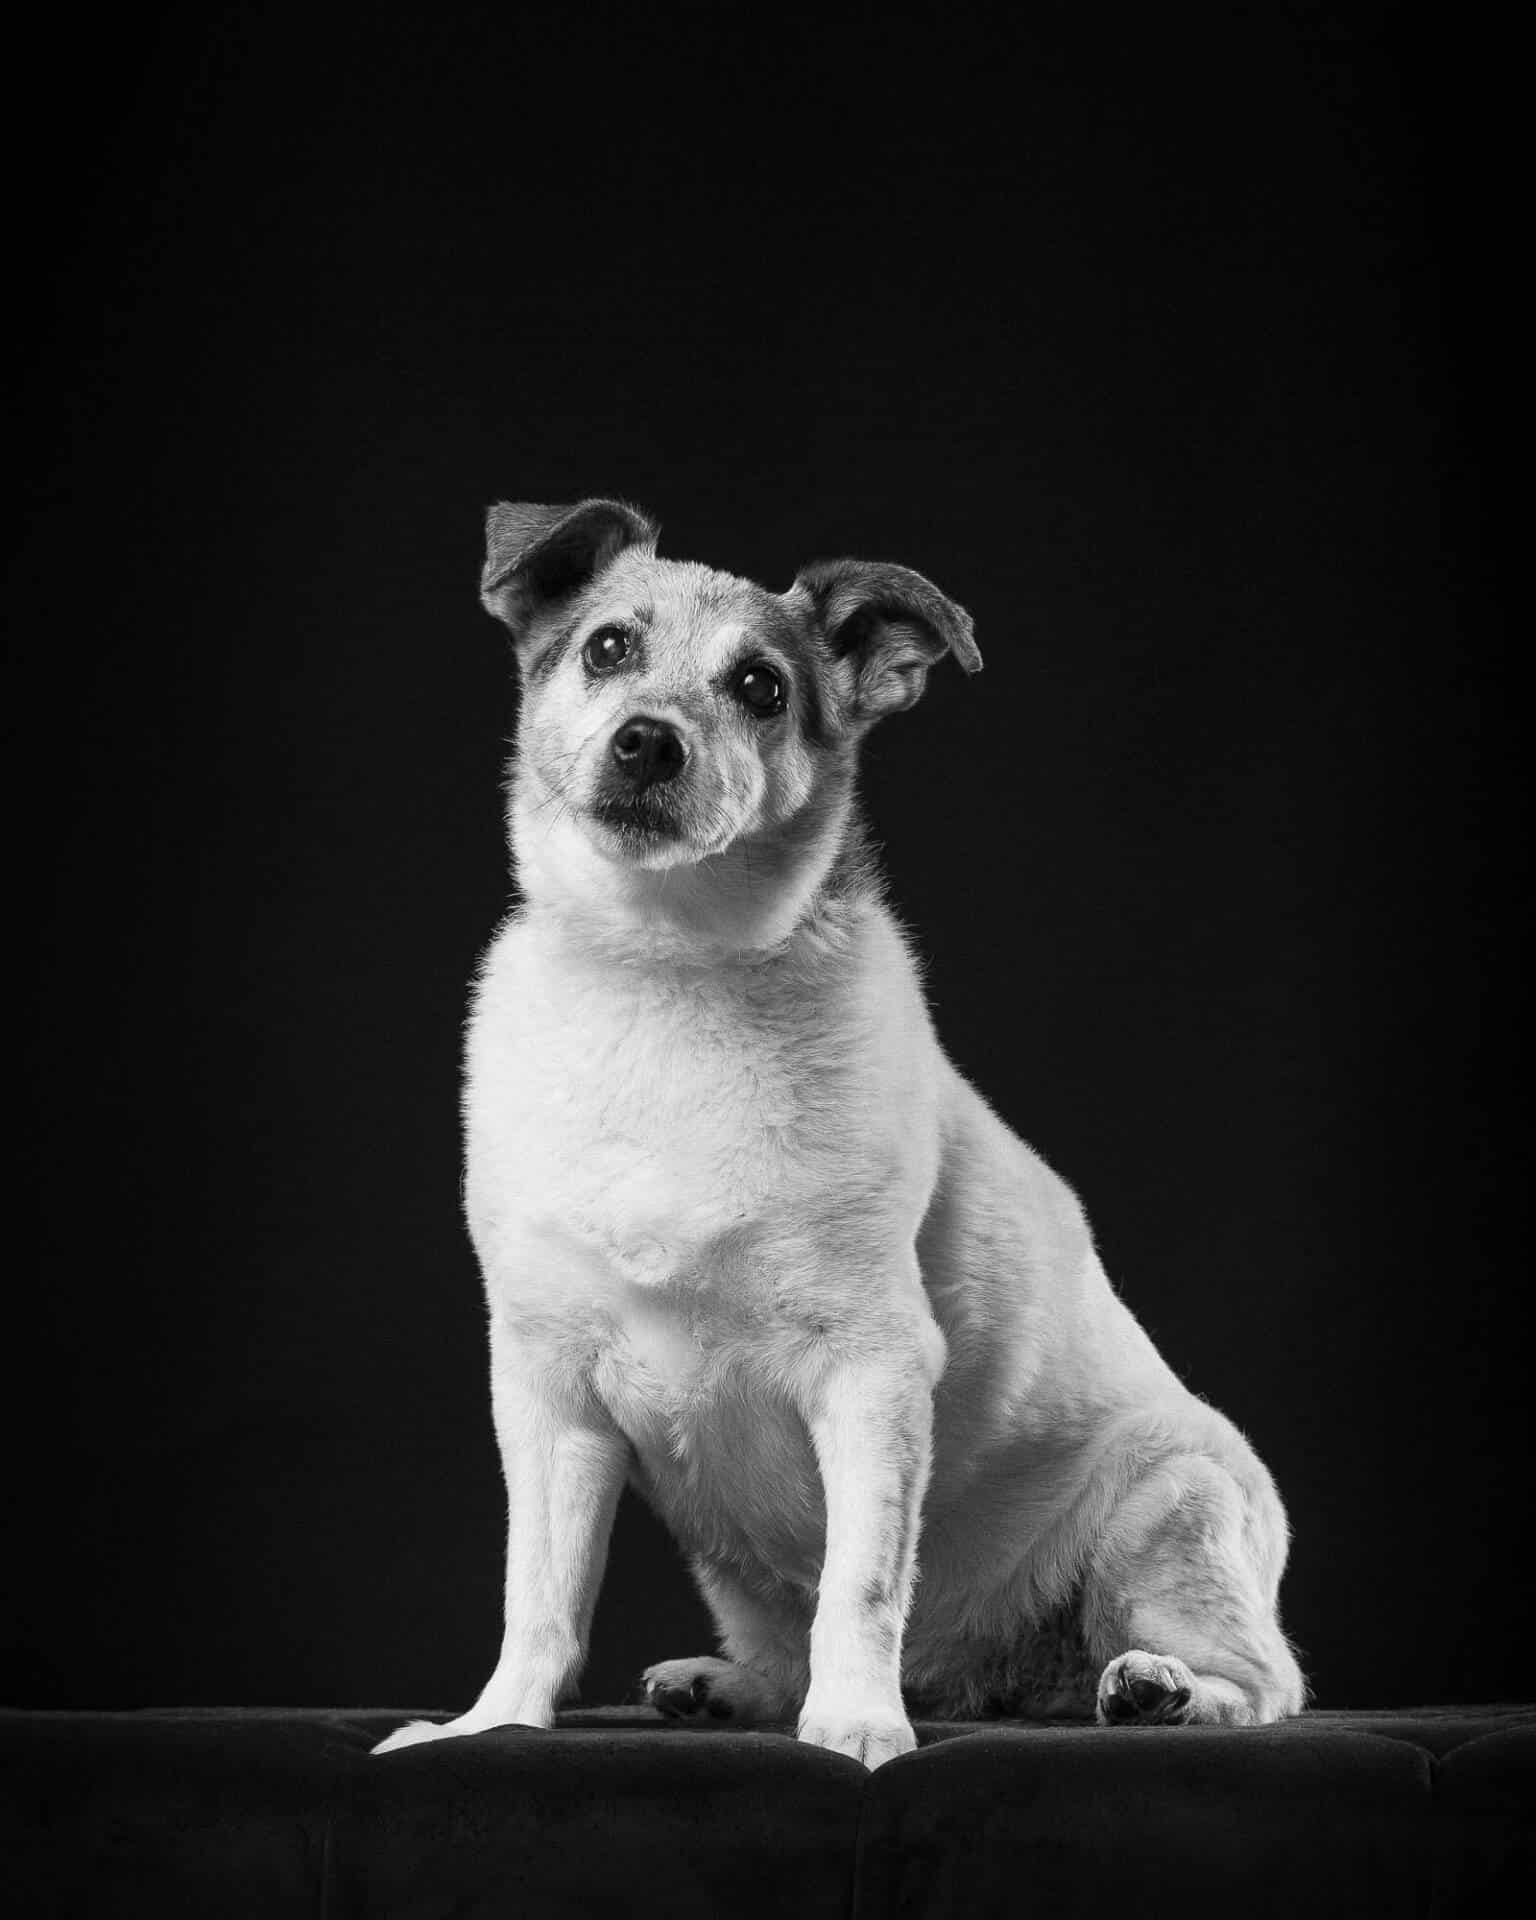 Terrier Dog Studio Portrait by Mark Hewitson of Mark Hewitson Photography, Thame, Oxfordshire